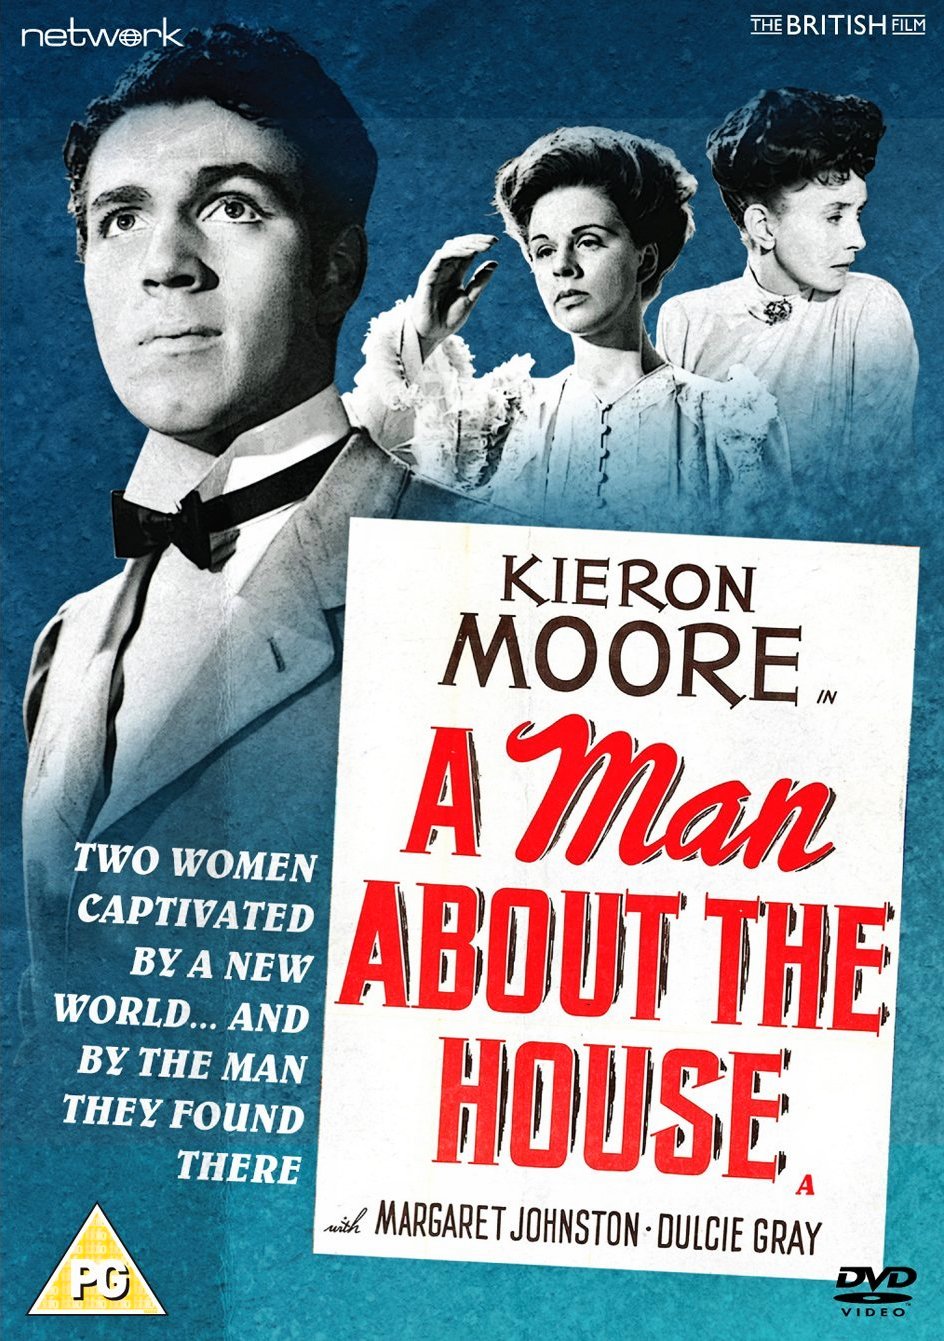 A Man About the House DVD from Network and The British Film.  Features Kieron Moore, Margaret Johnston and Dulcie Gray.  ‘Two women captivated by a new world… and by the man they found there.’